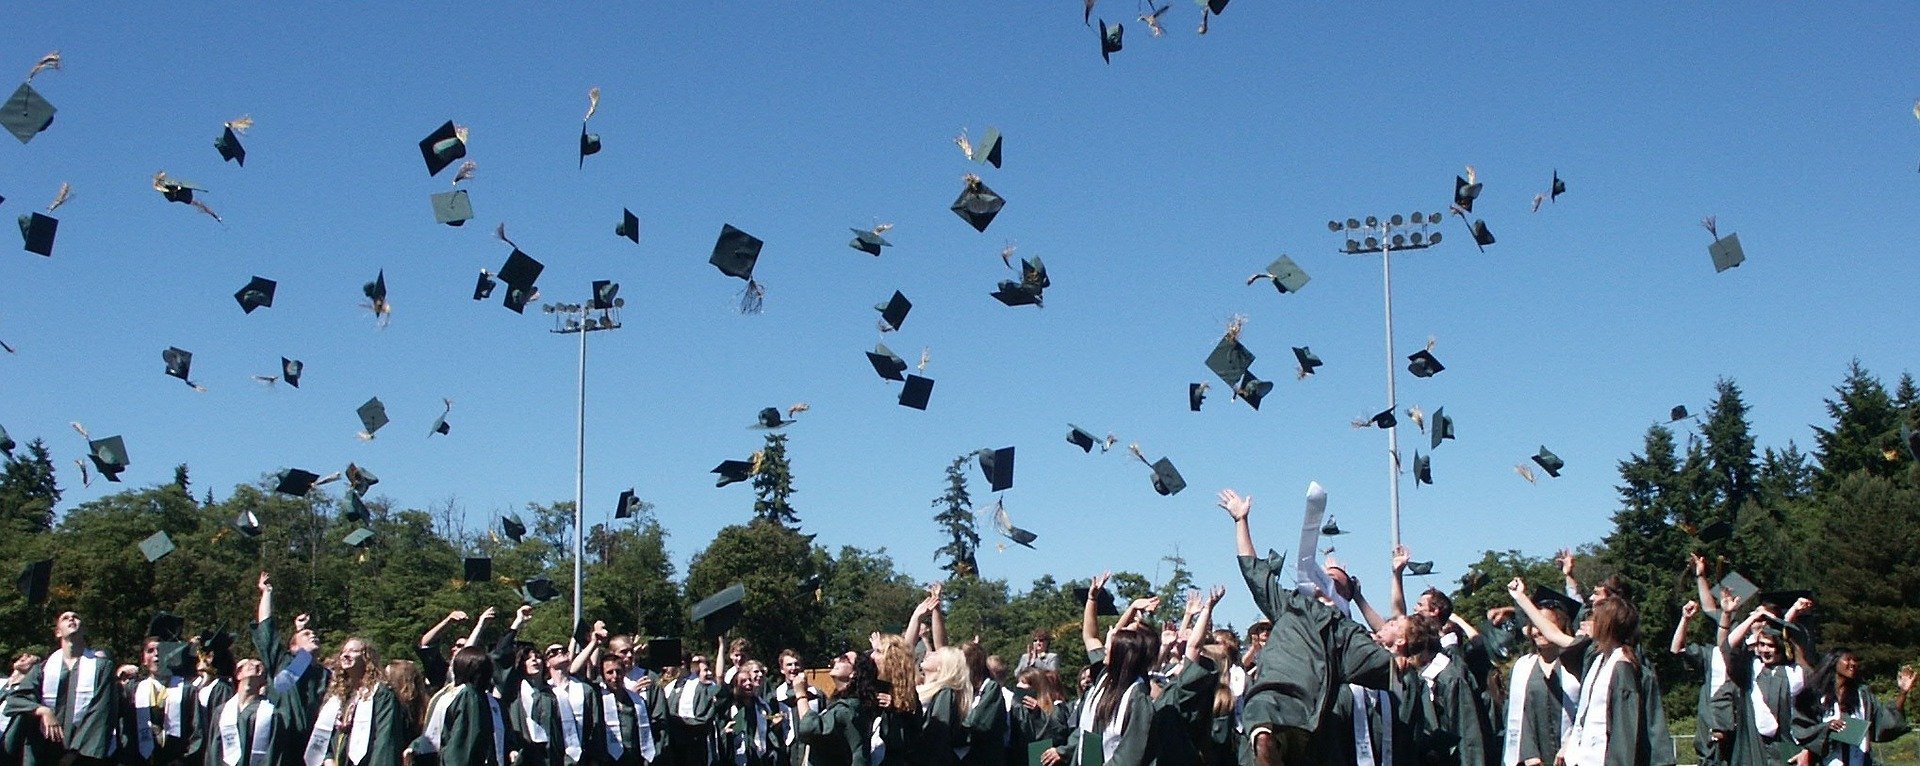 A bunch of high school graduates throw their graduation caps up in the air while celebrating outdoors | Photo: Pixabay/Gillian Callison